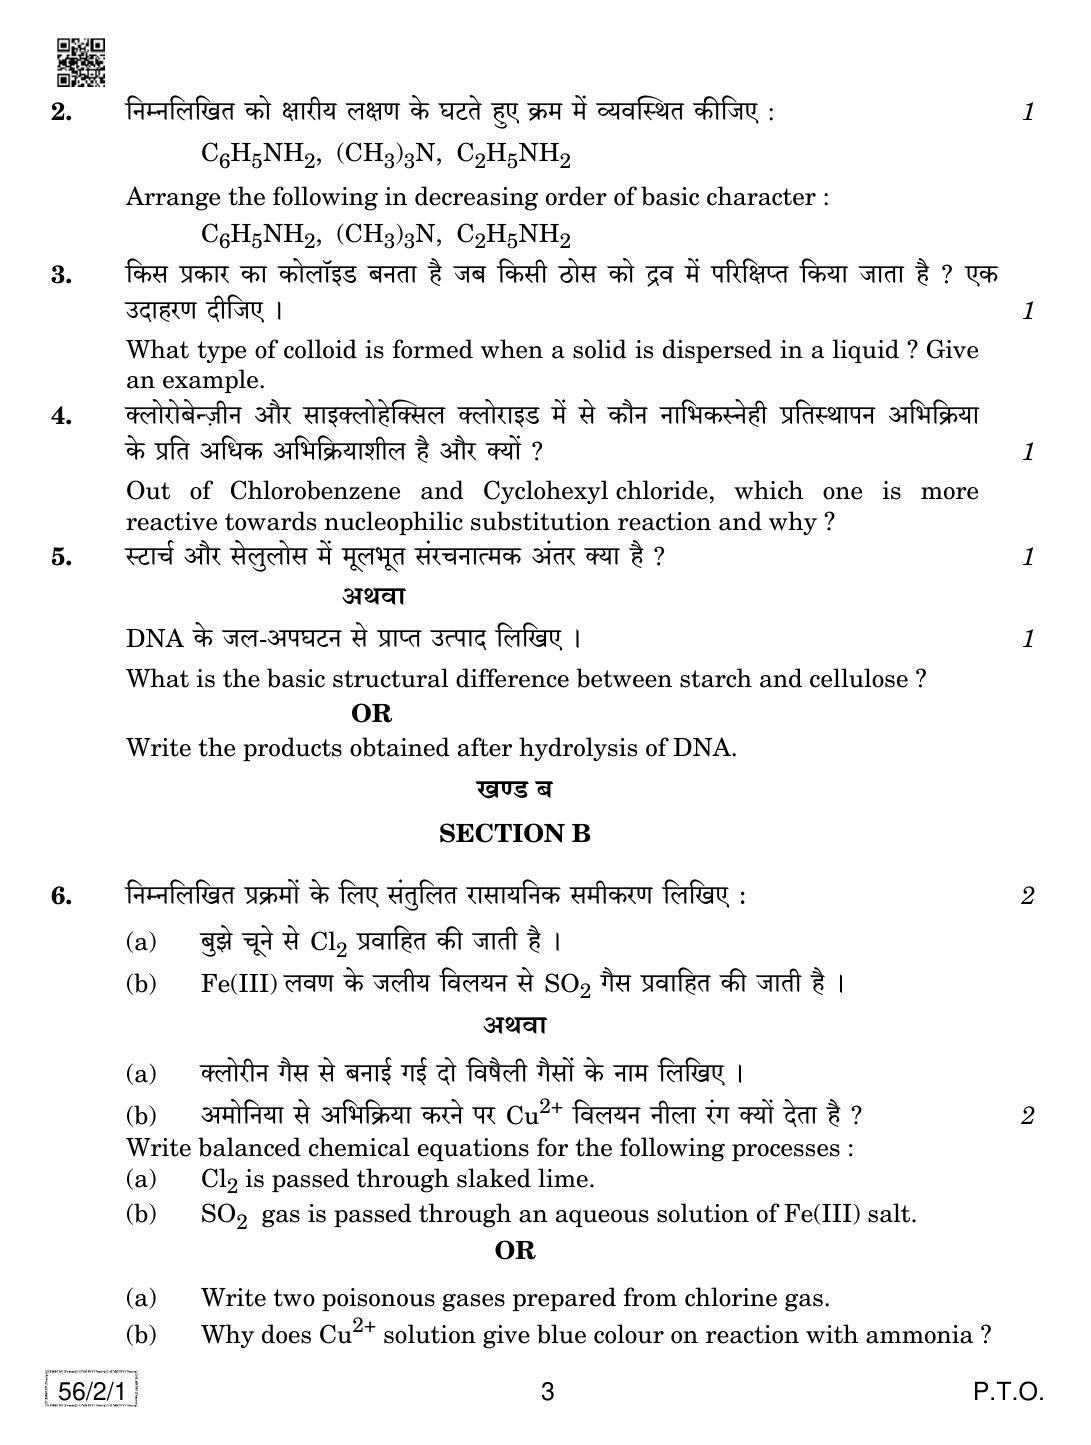 CBSE Class 12 56-2-1 Chemistry 2019 Question Paper - Page 3